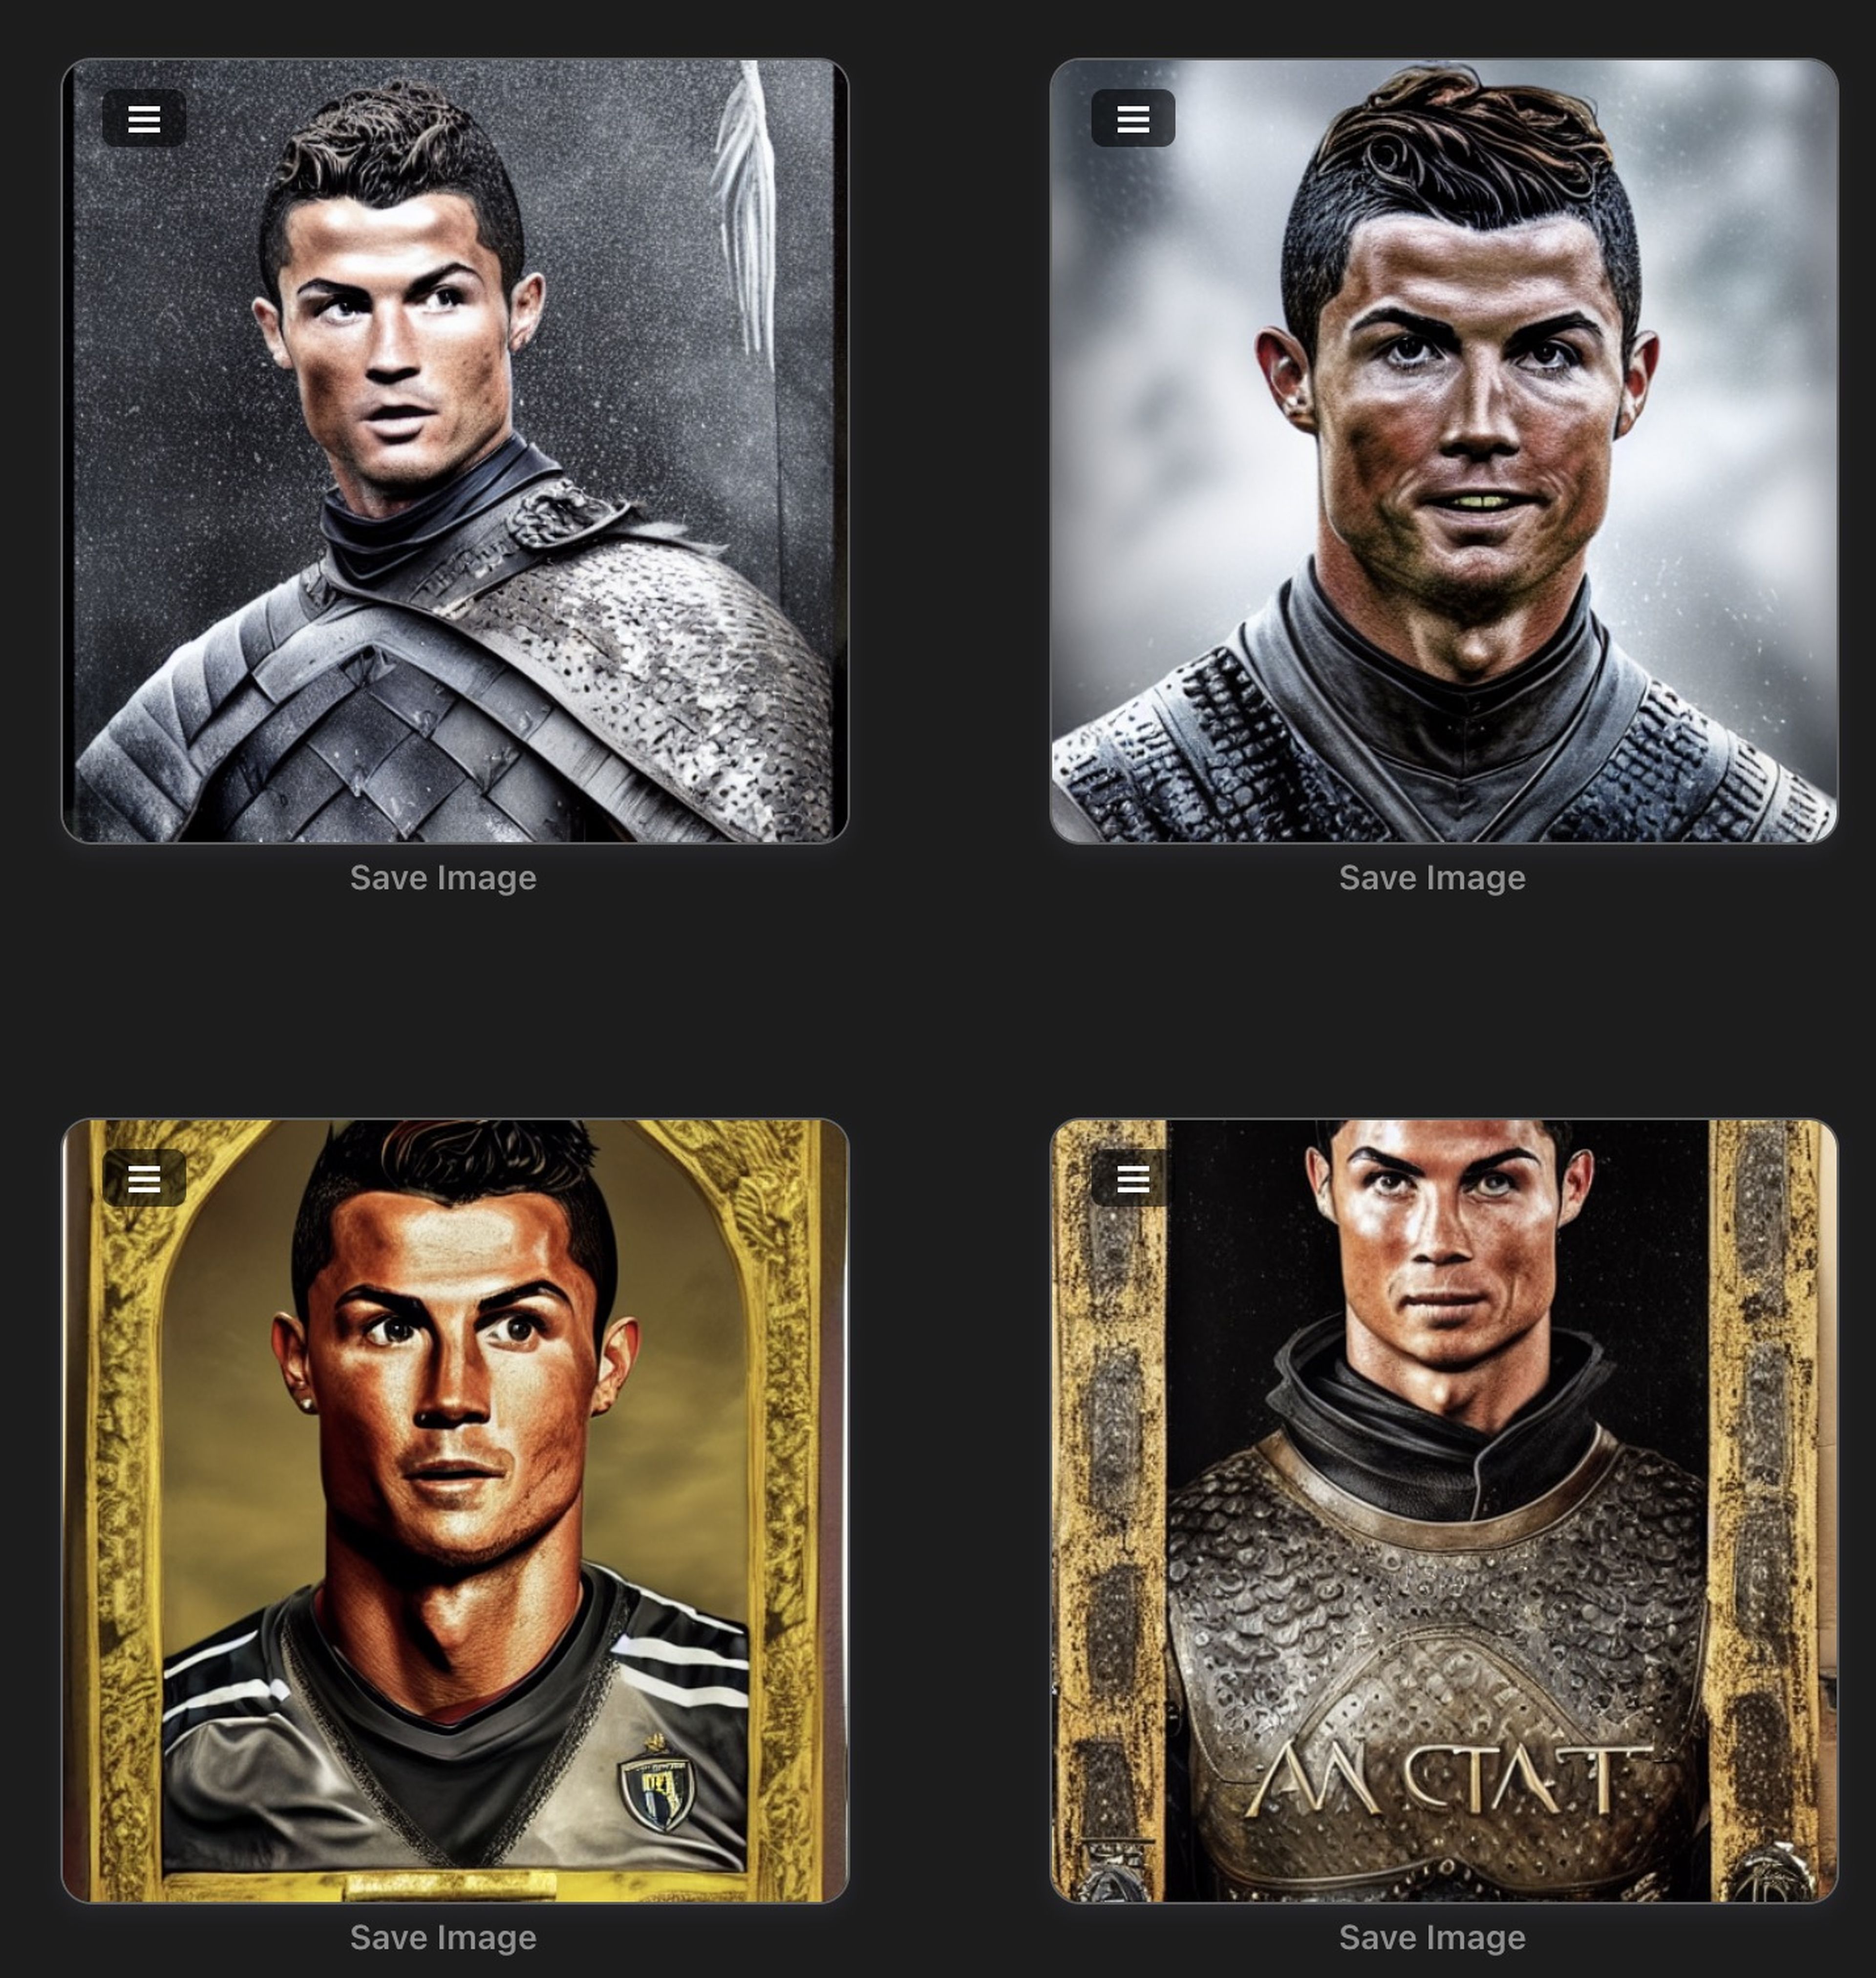 A portrait of cristiano ronaldo in game of thrones, portrait, highly detailed and intrincated